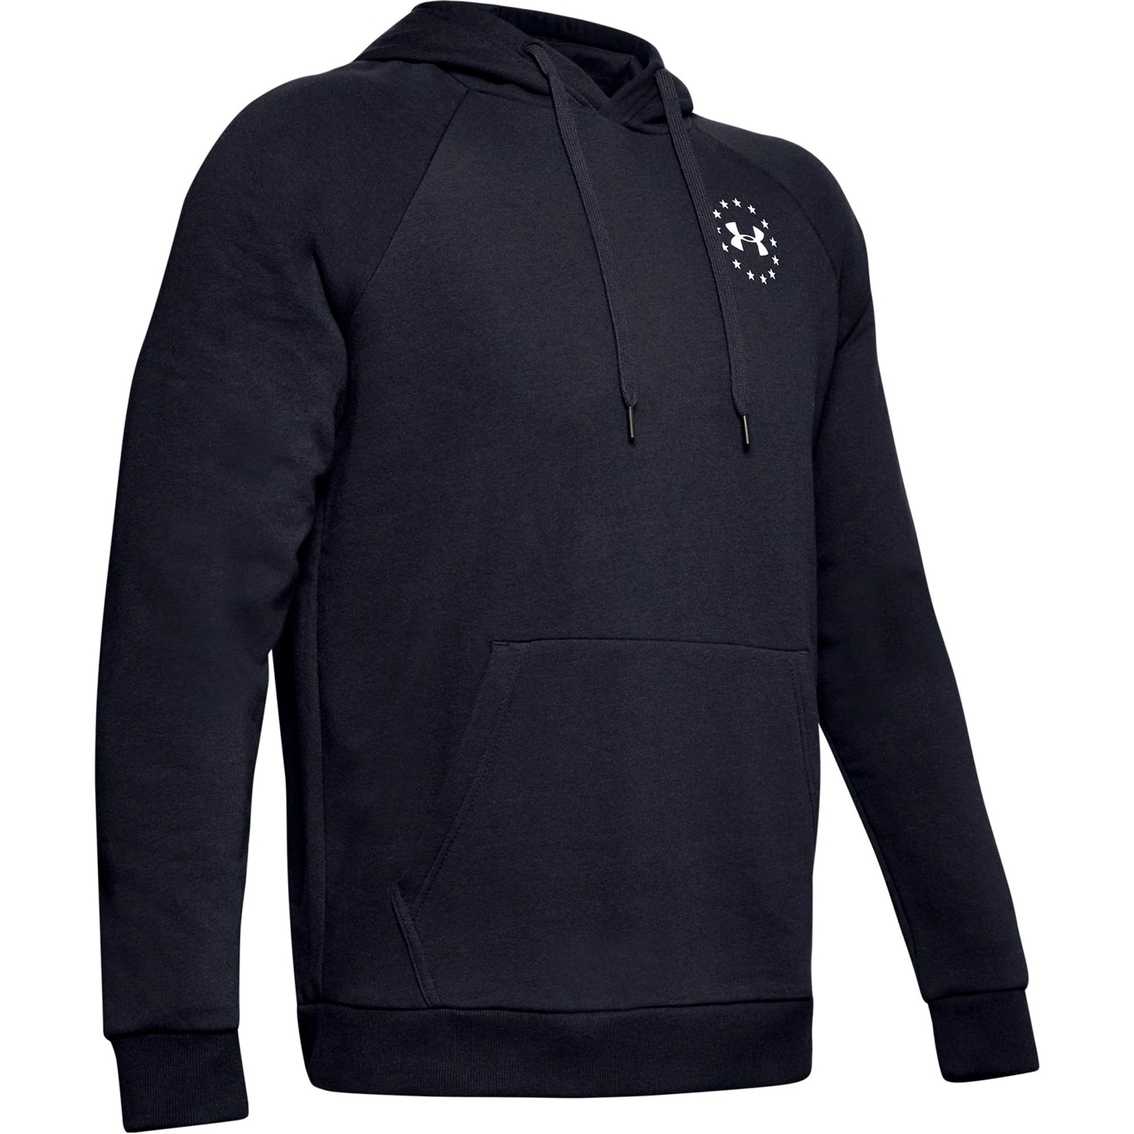 Freedom Flag Rival PO Hoodie - Image 4 of 6